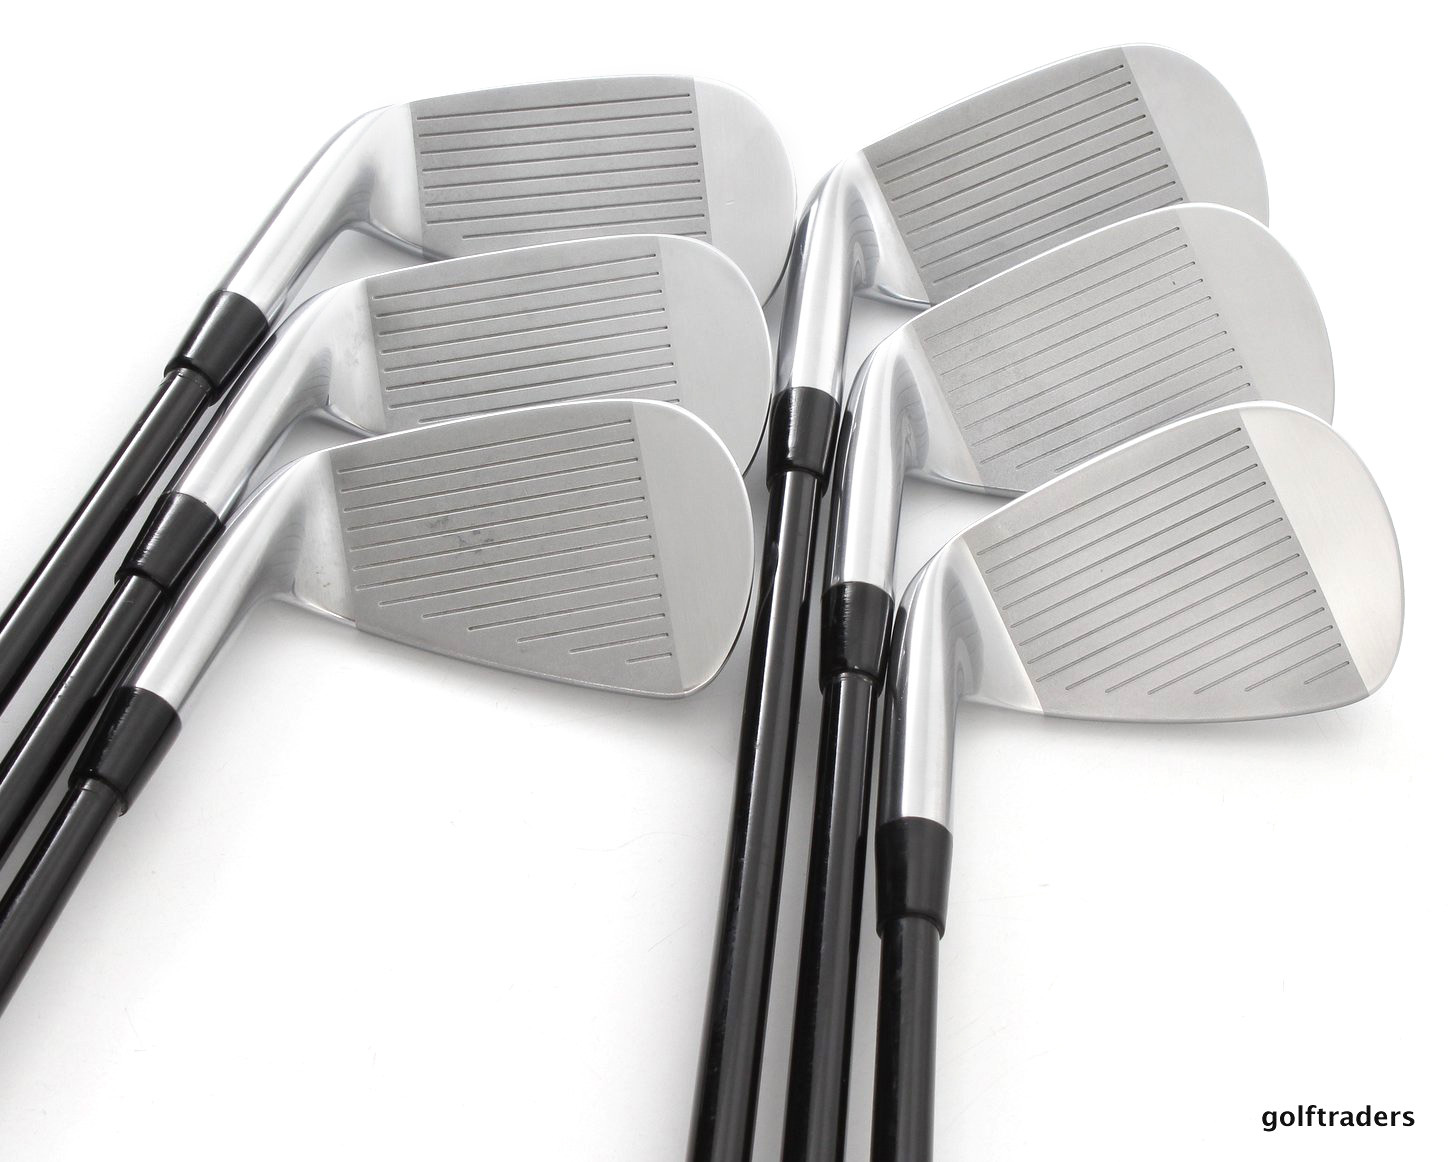 srixon i 506 forged irons review